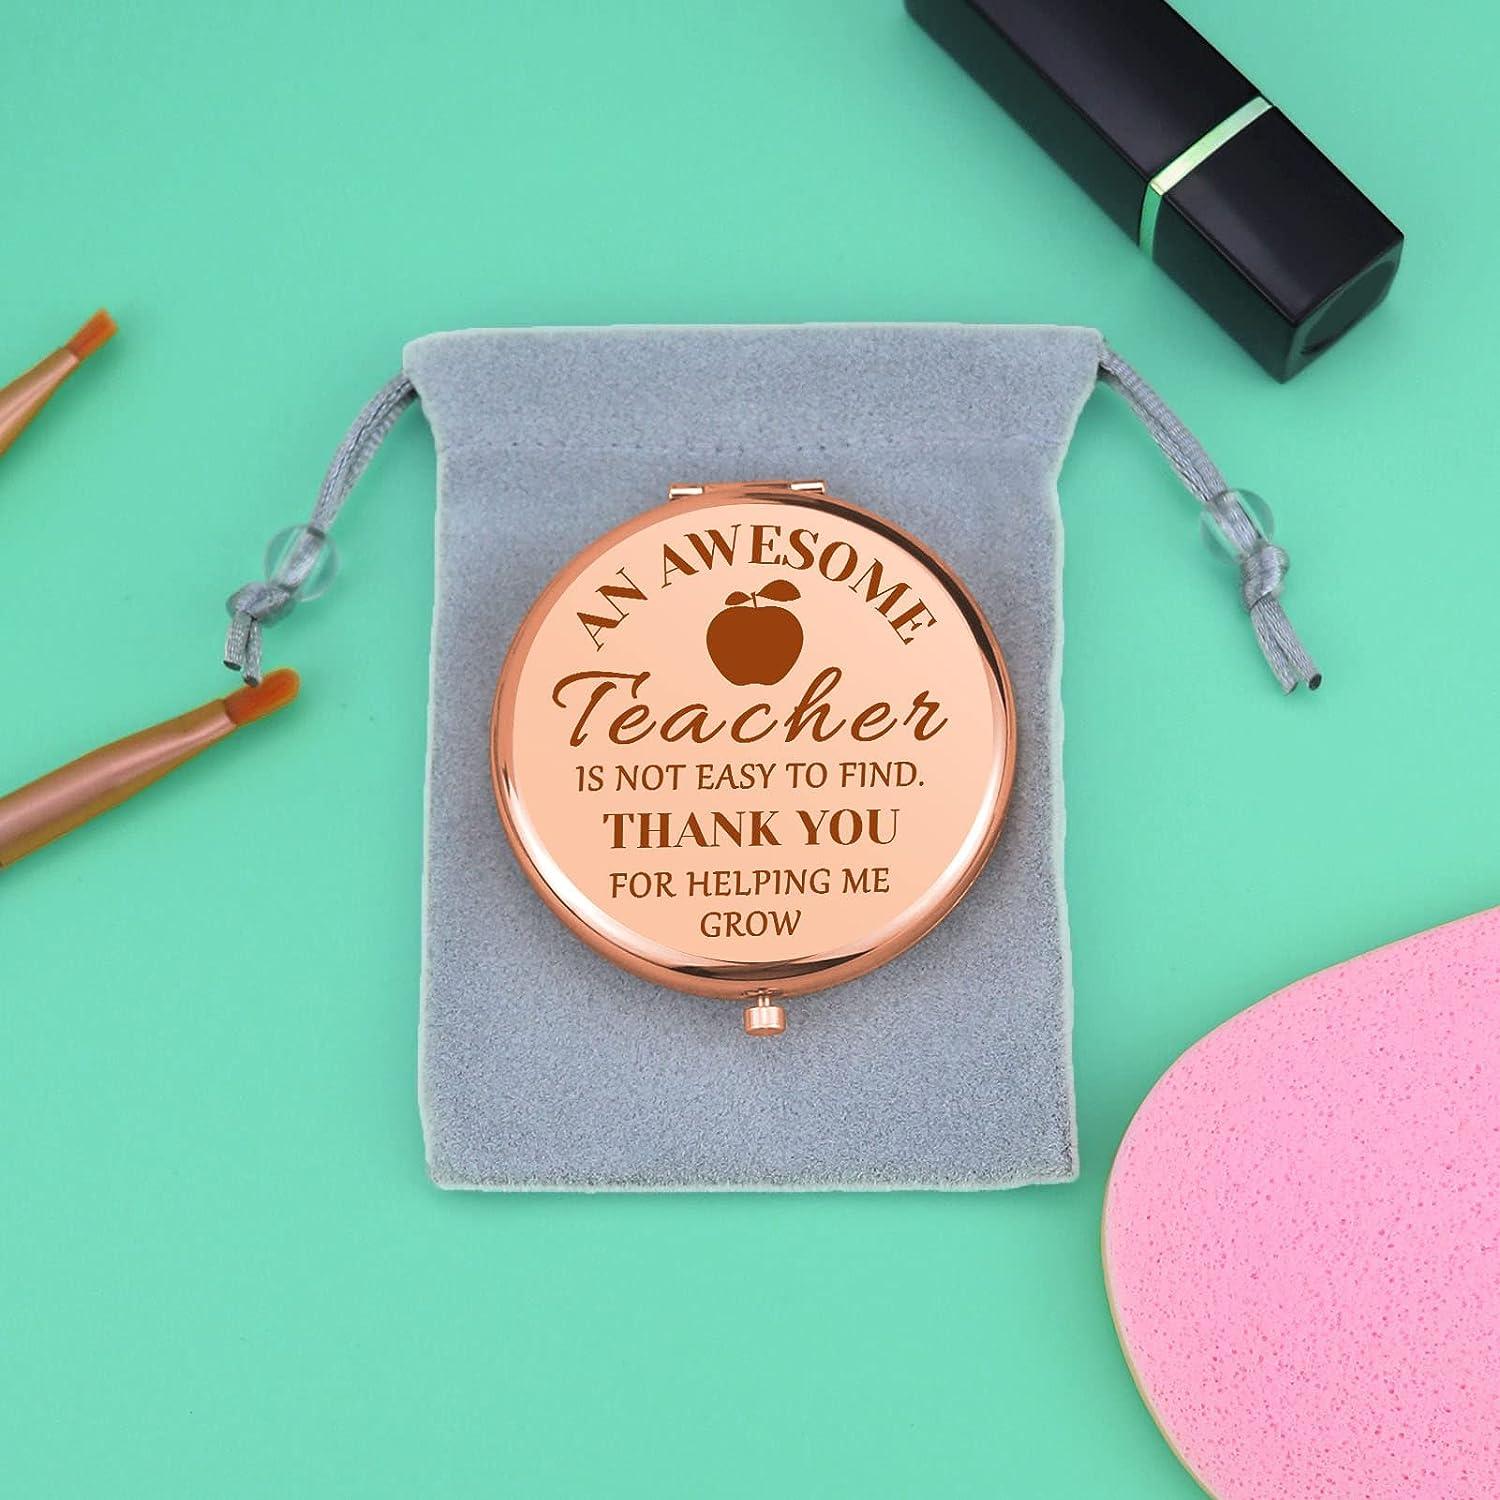 21 Small Gifts Teachers Love the Most ($10 or Less)